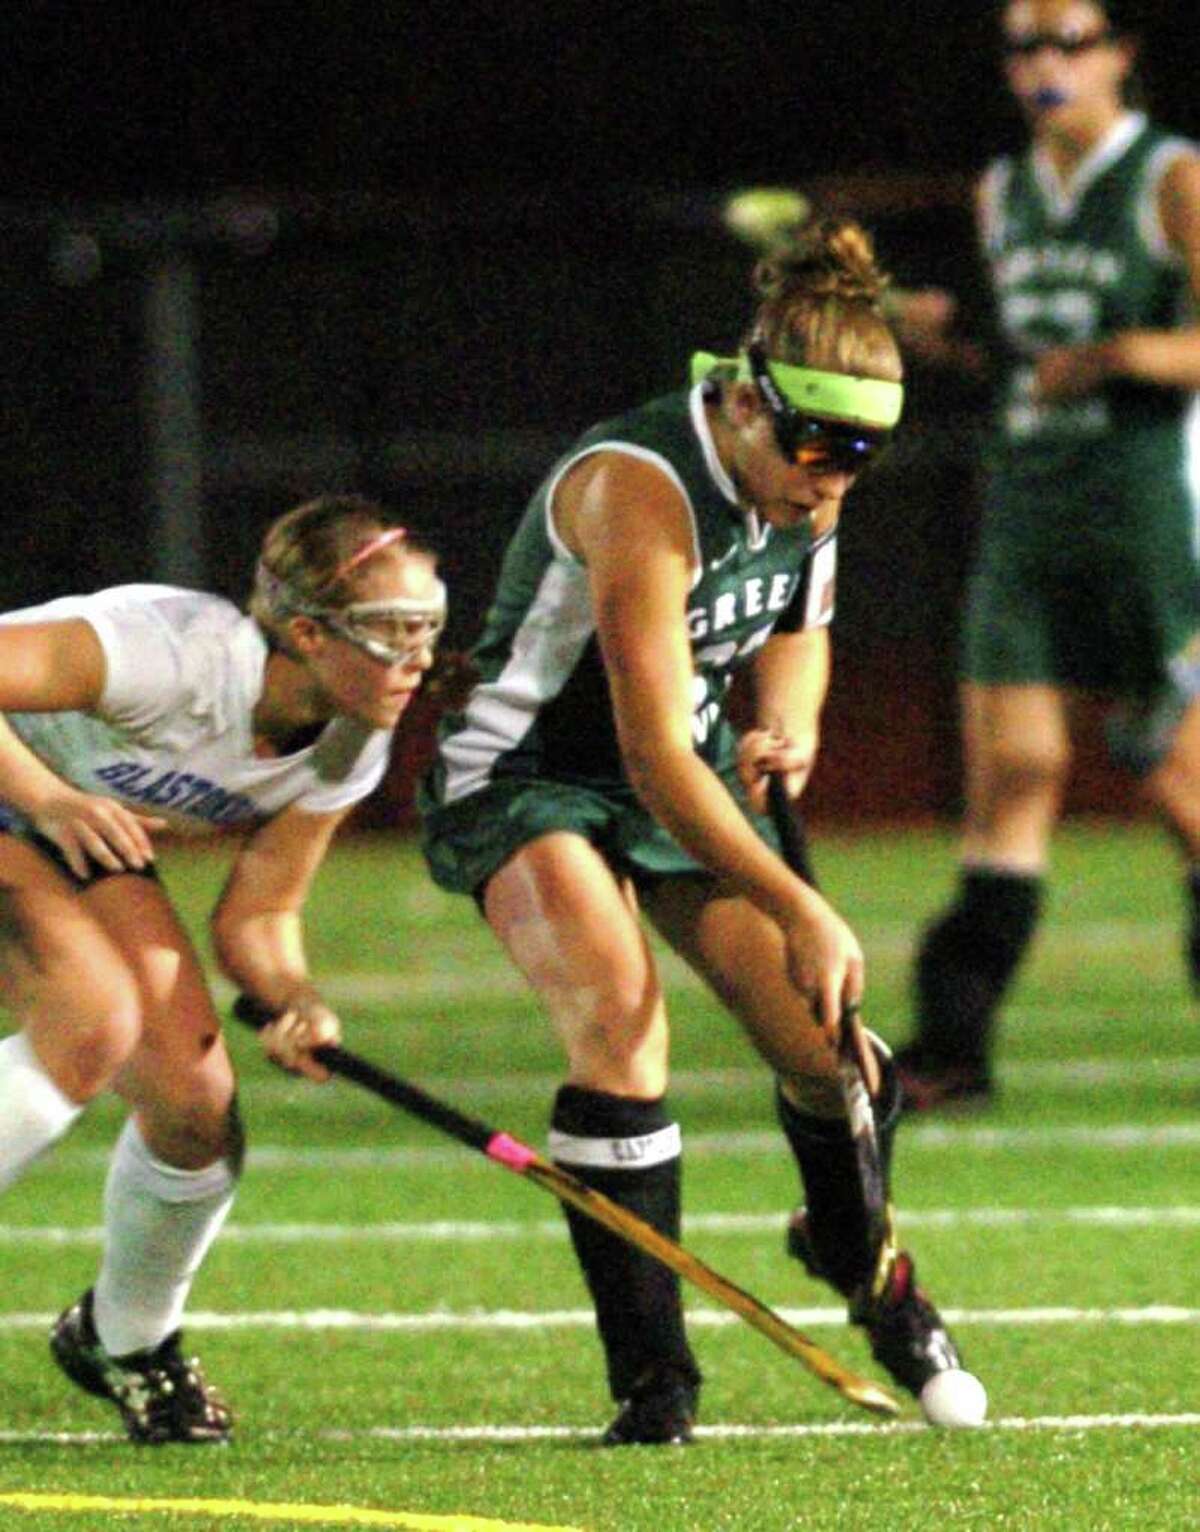 New Milford's 37, Kelsey Heaton competes with Glastonbury's 5, Hayley Hoge during the field hockey game at Watertown High School Nov. 16, 2010.